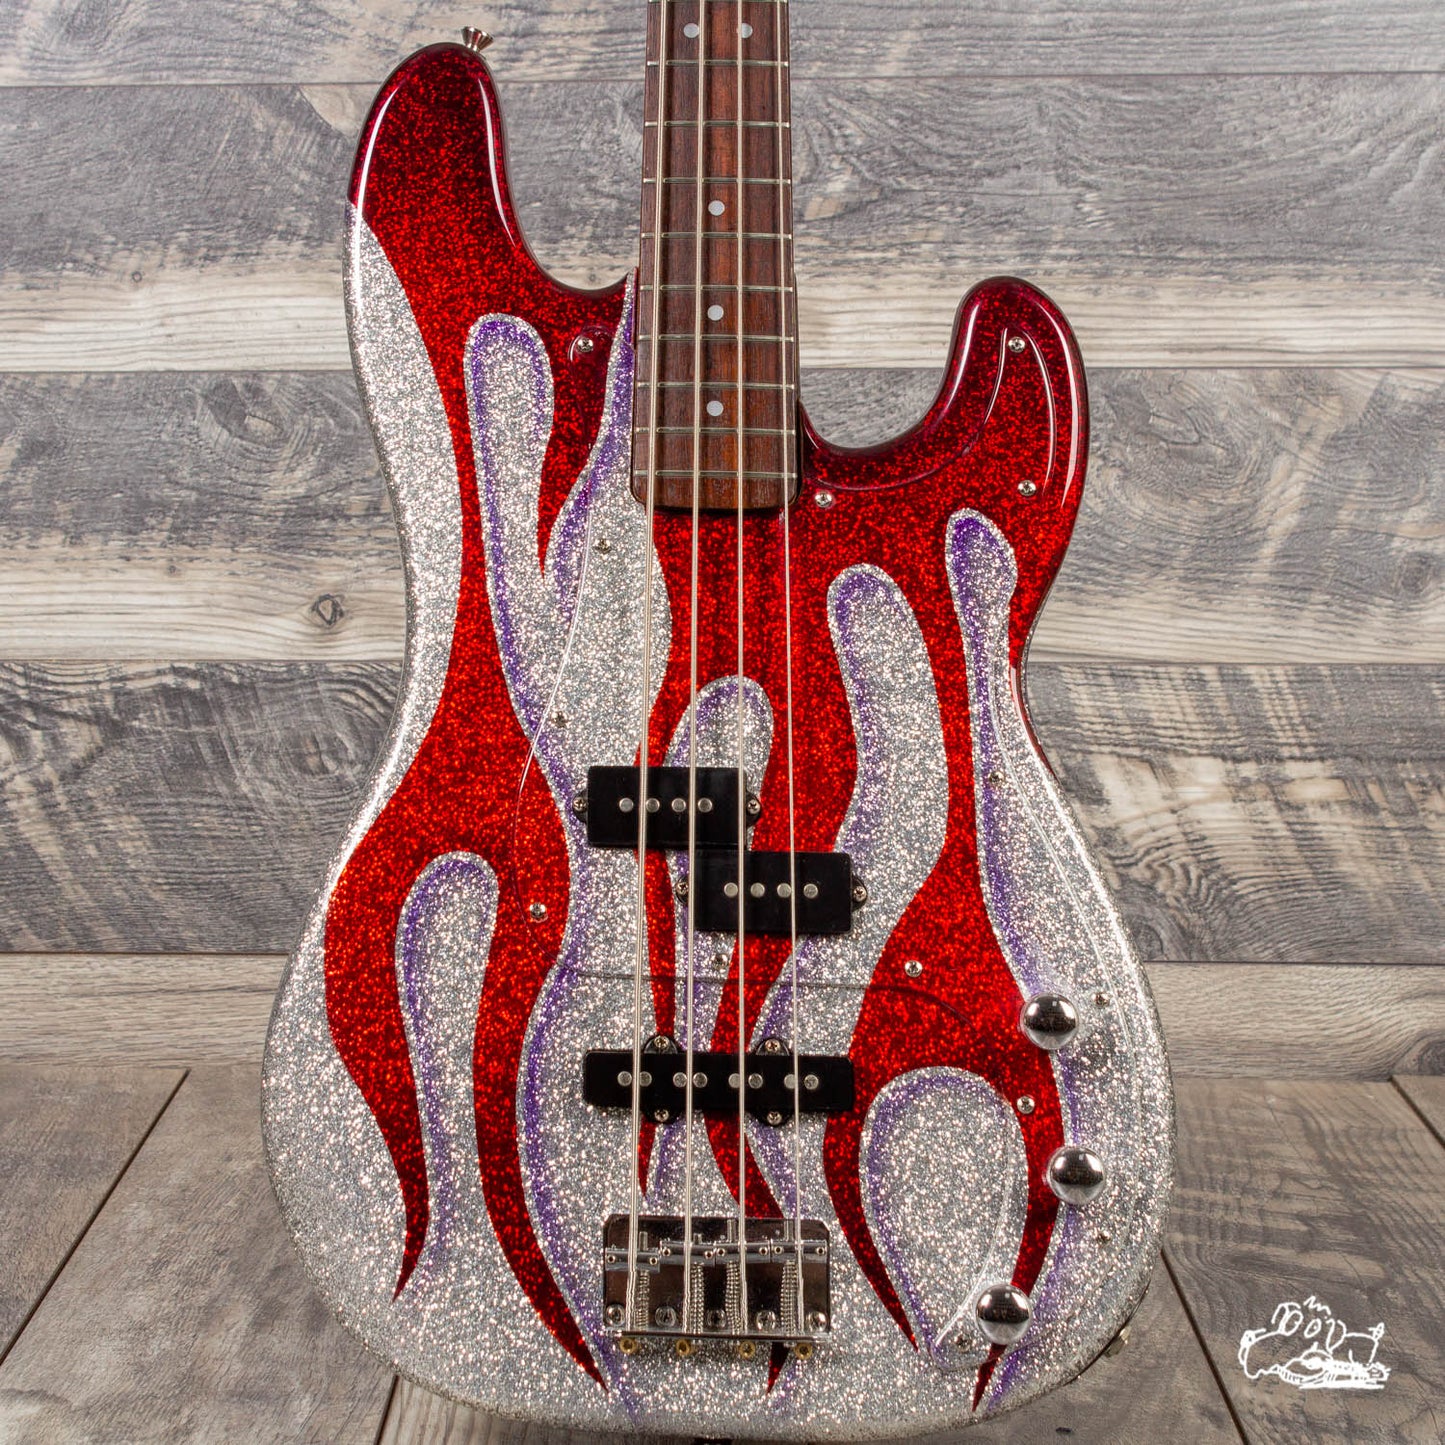 Bell & Hern Bass in "Shot Down in Flames" Custom Sparkle